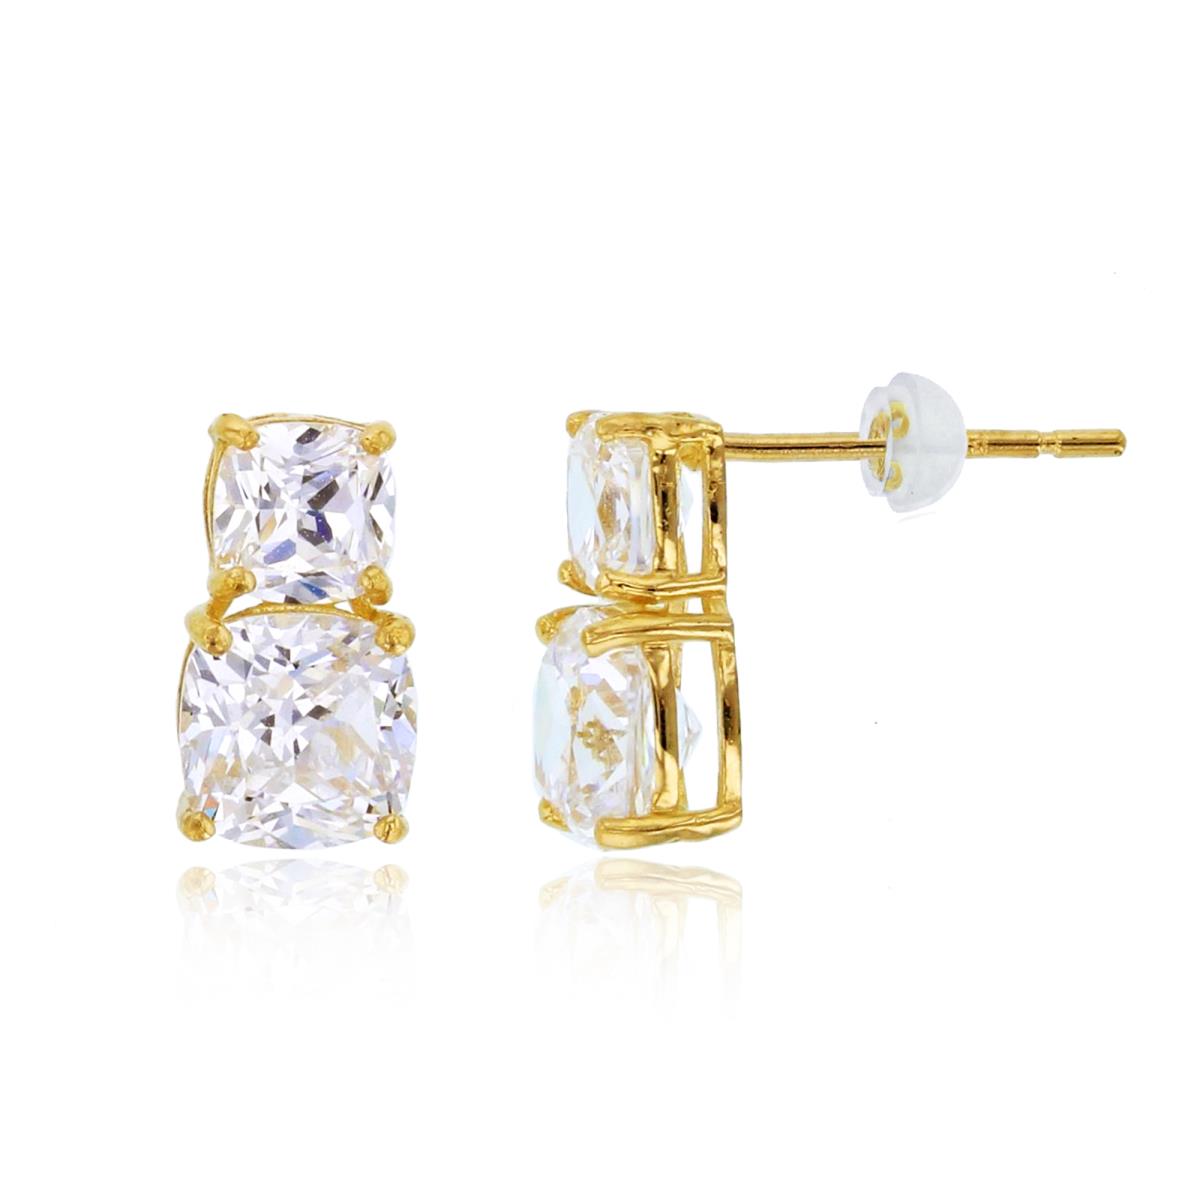 10K Yellow Gold 4mm & 5mm Cush CZ Studs with Silicon Backs